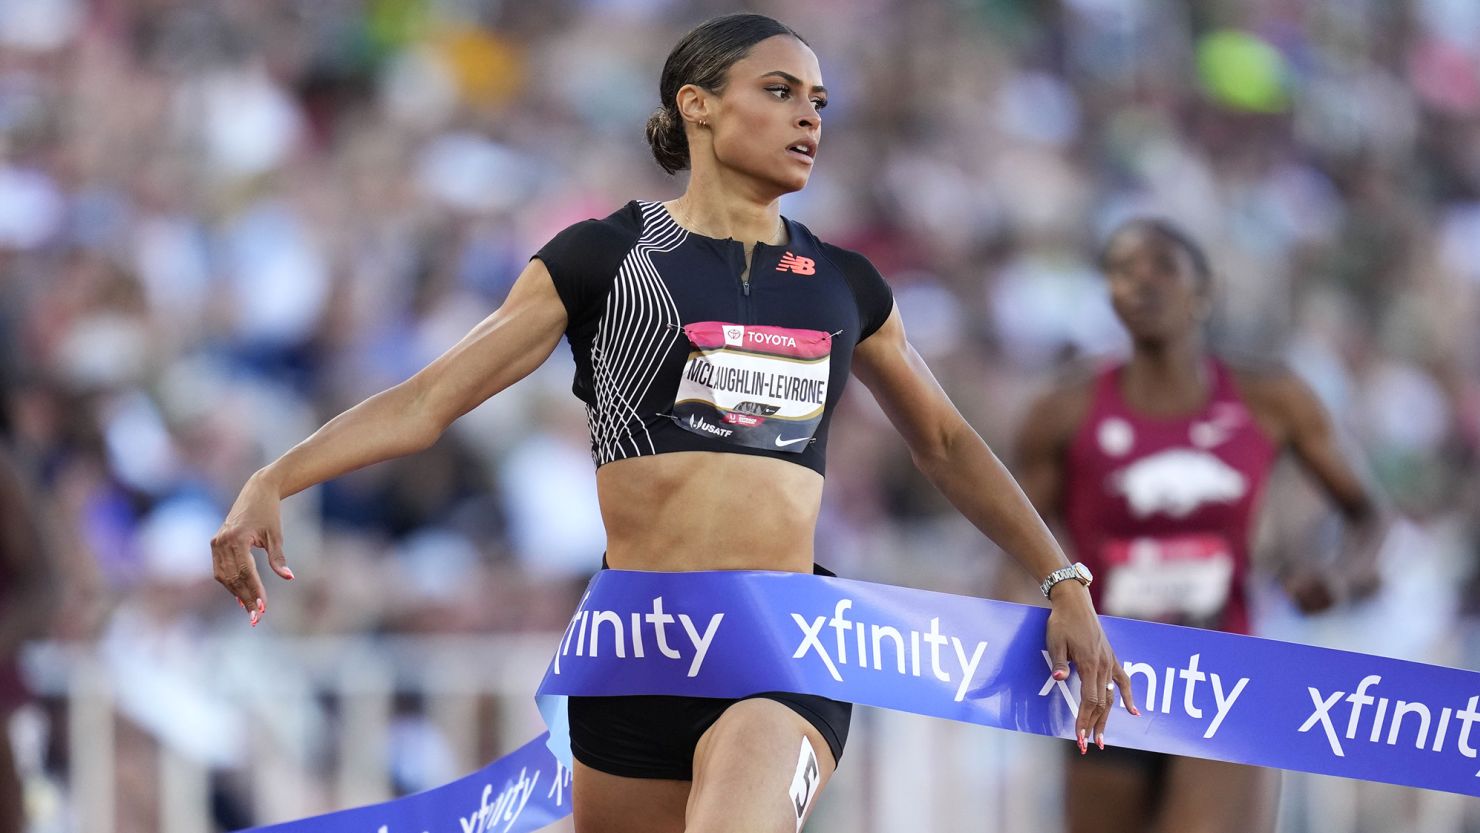 Sydney McLaughlin-Levrone crosses the finish line to win the women's 400 meter final during the U.S. track and field championships in Eugene, Ore., Saturday, July 8, 2023. (AP Photo/Ashley Landis)